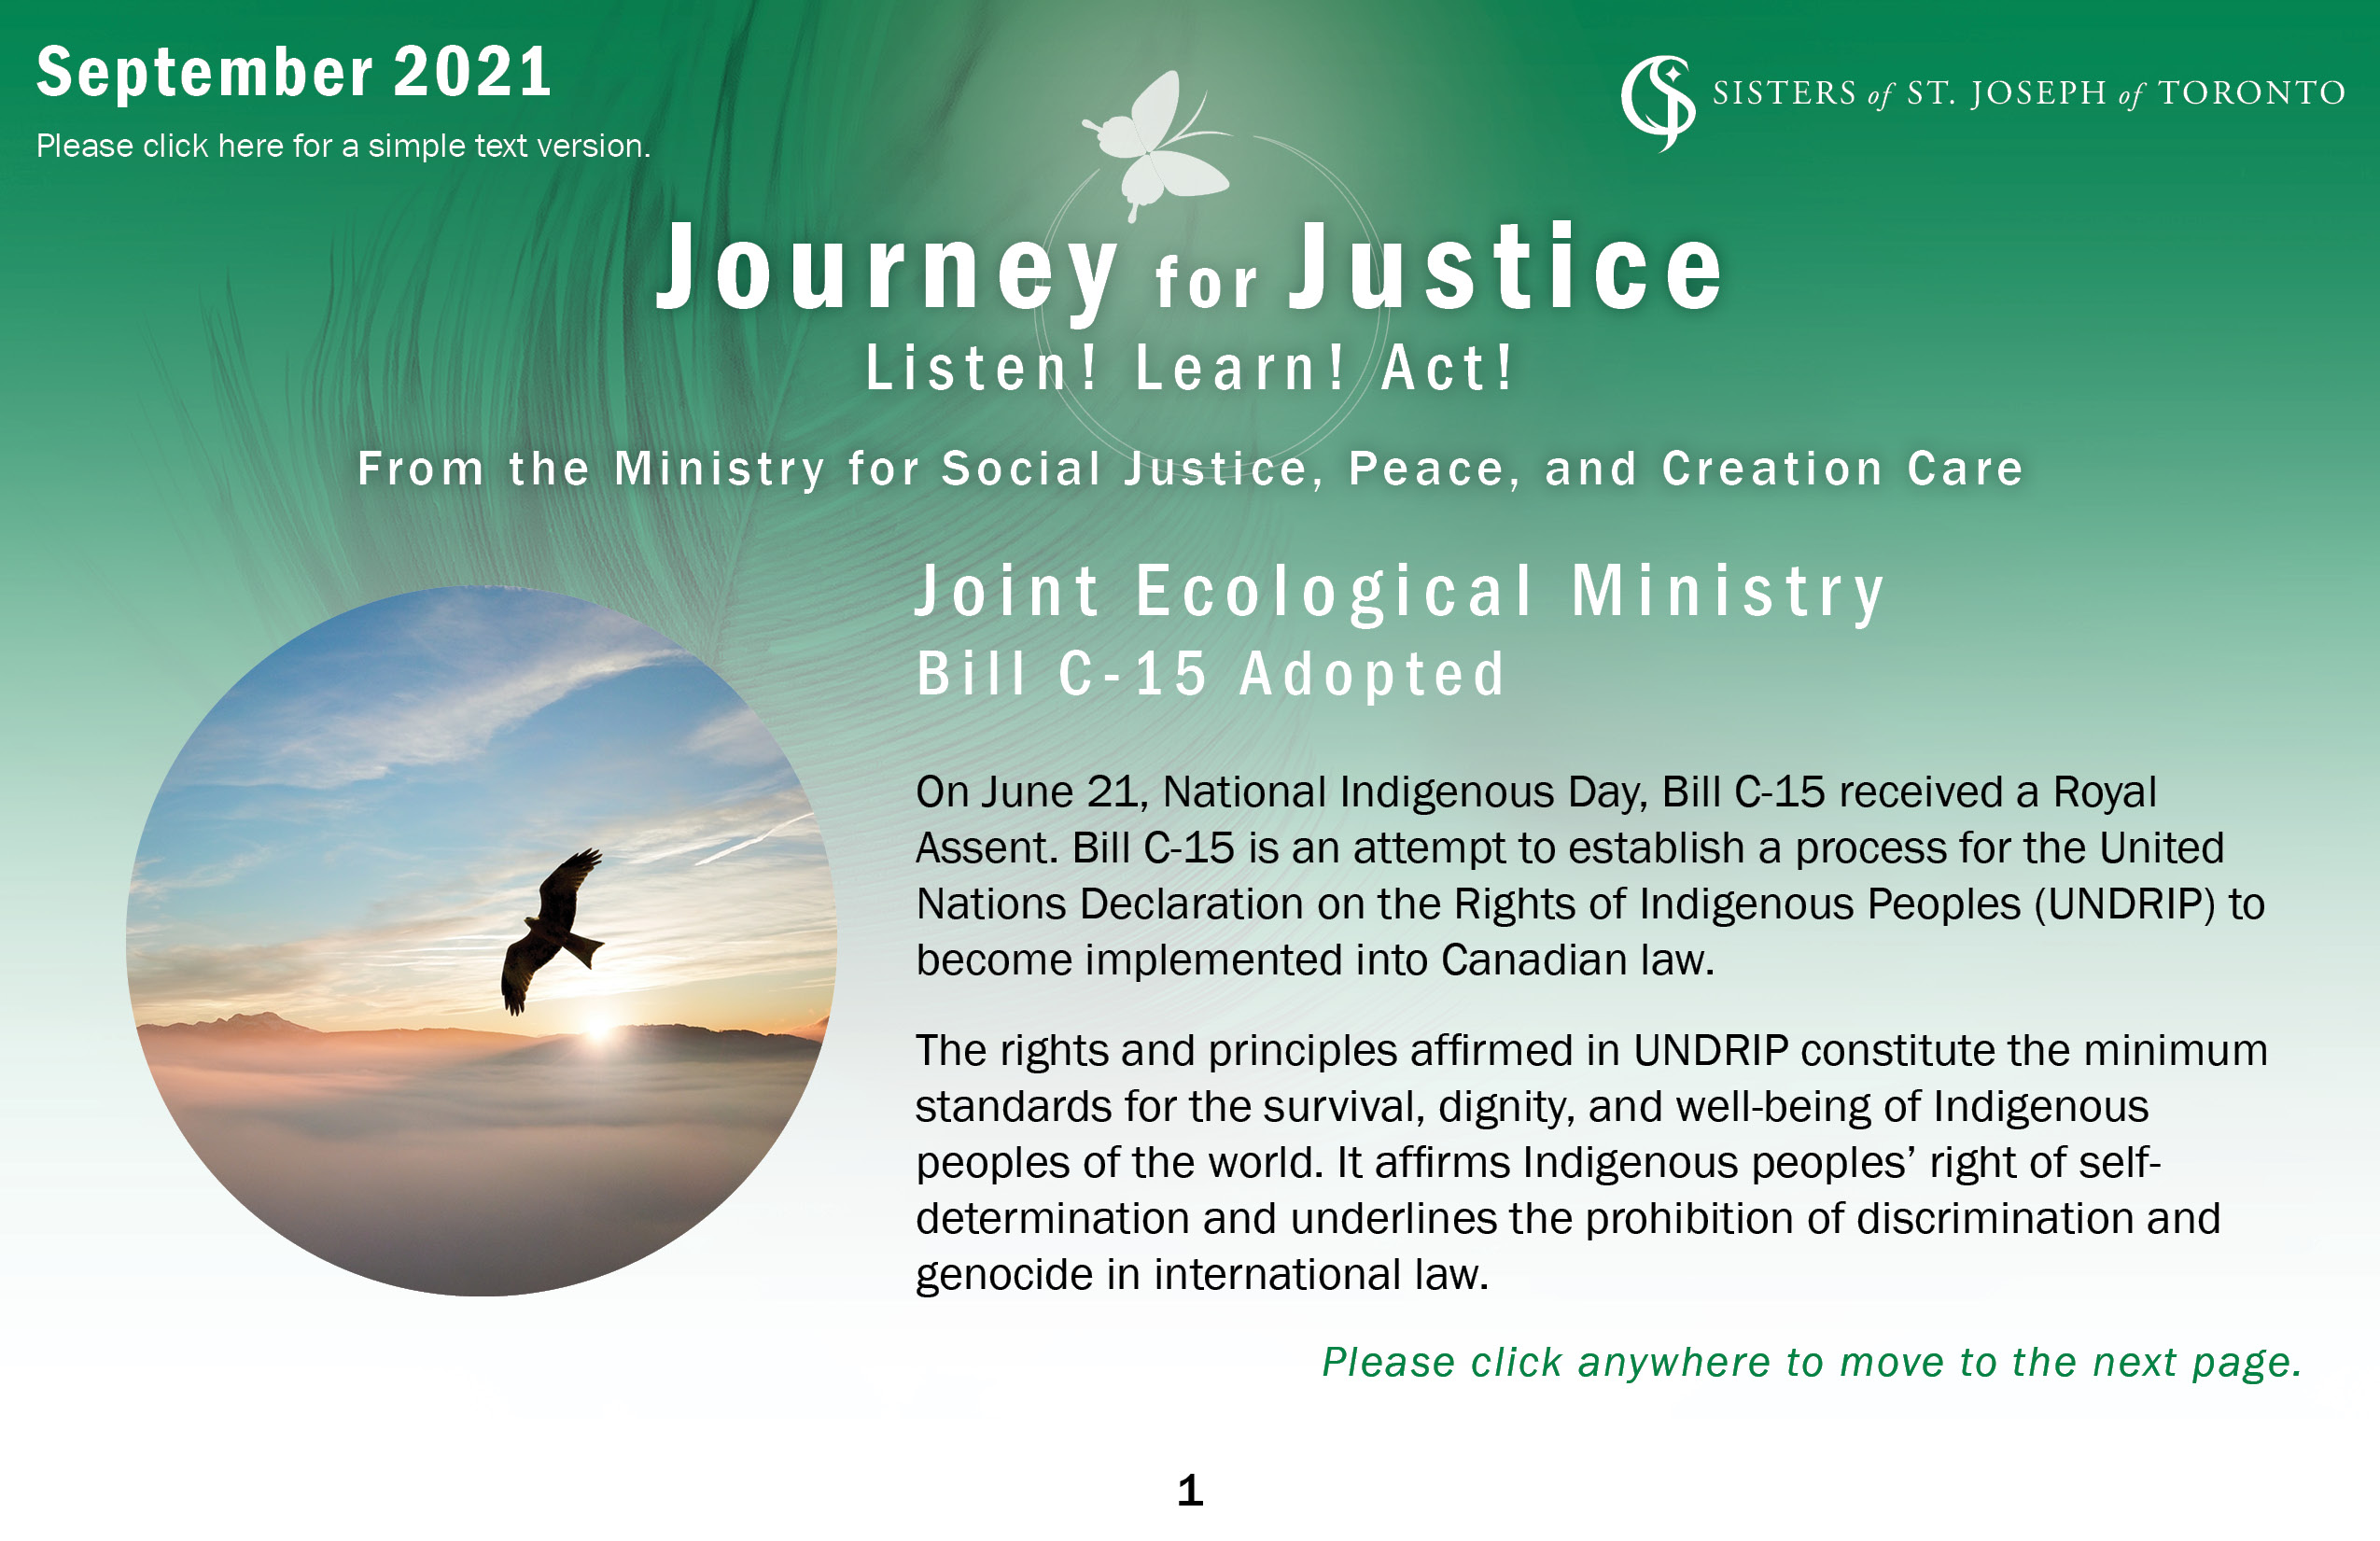 Journey for Justice Sept 2021 August 30 2021